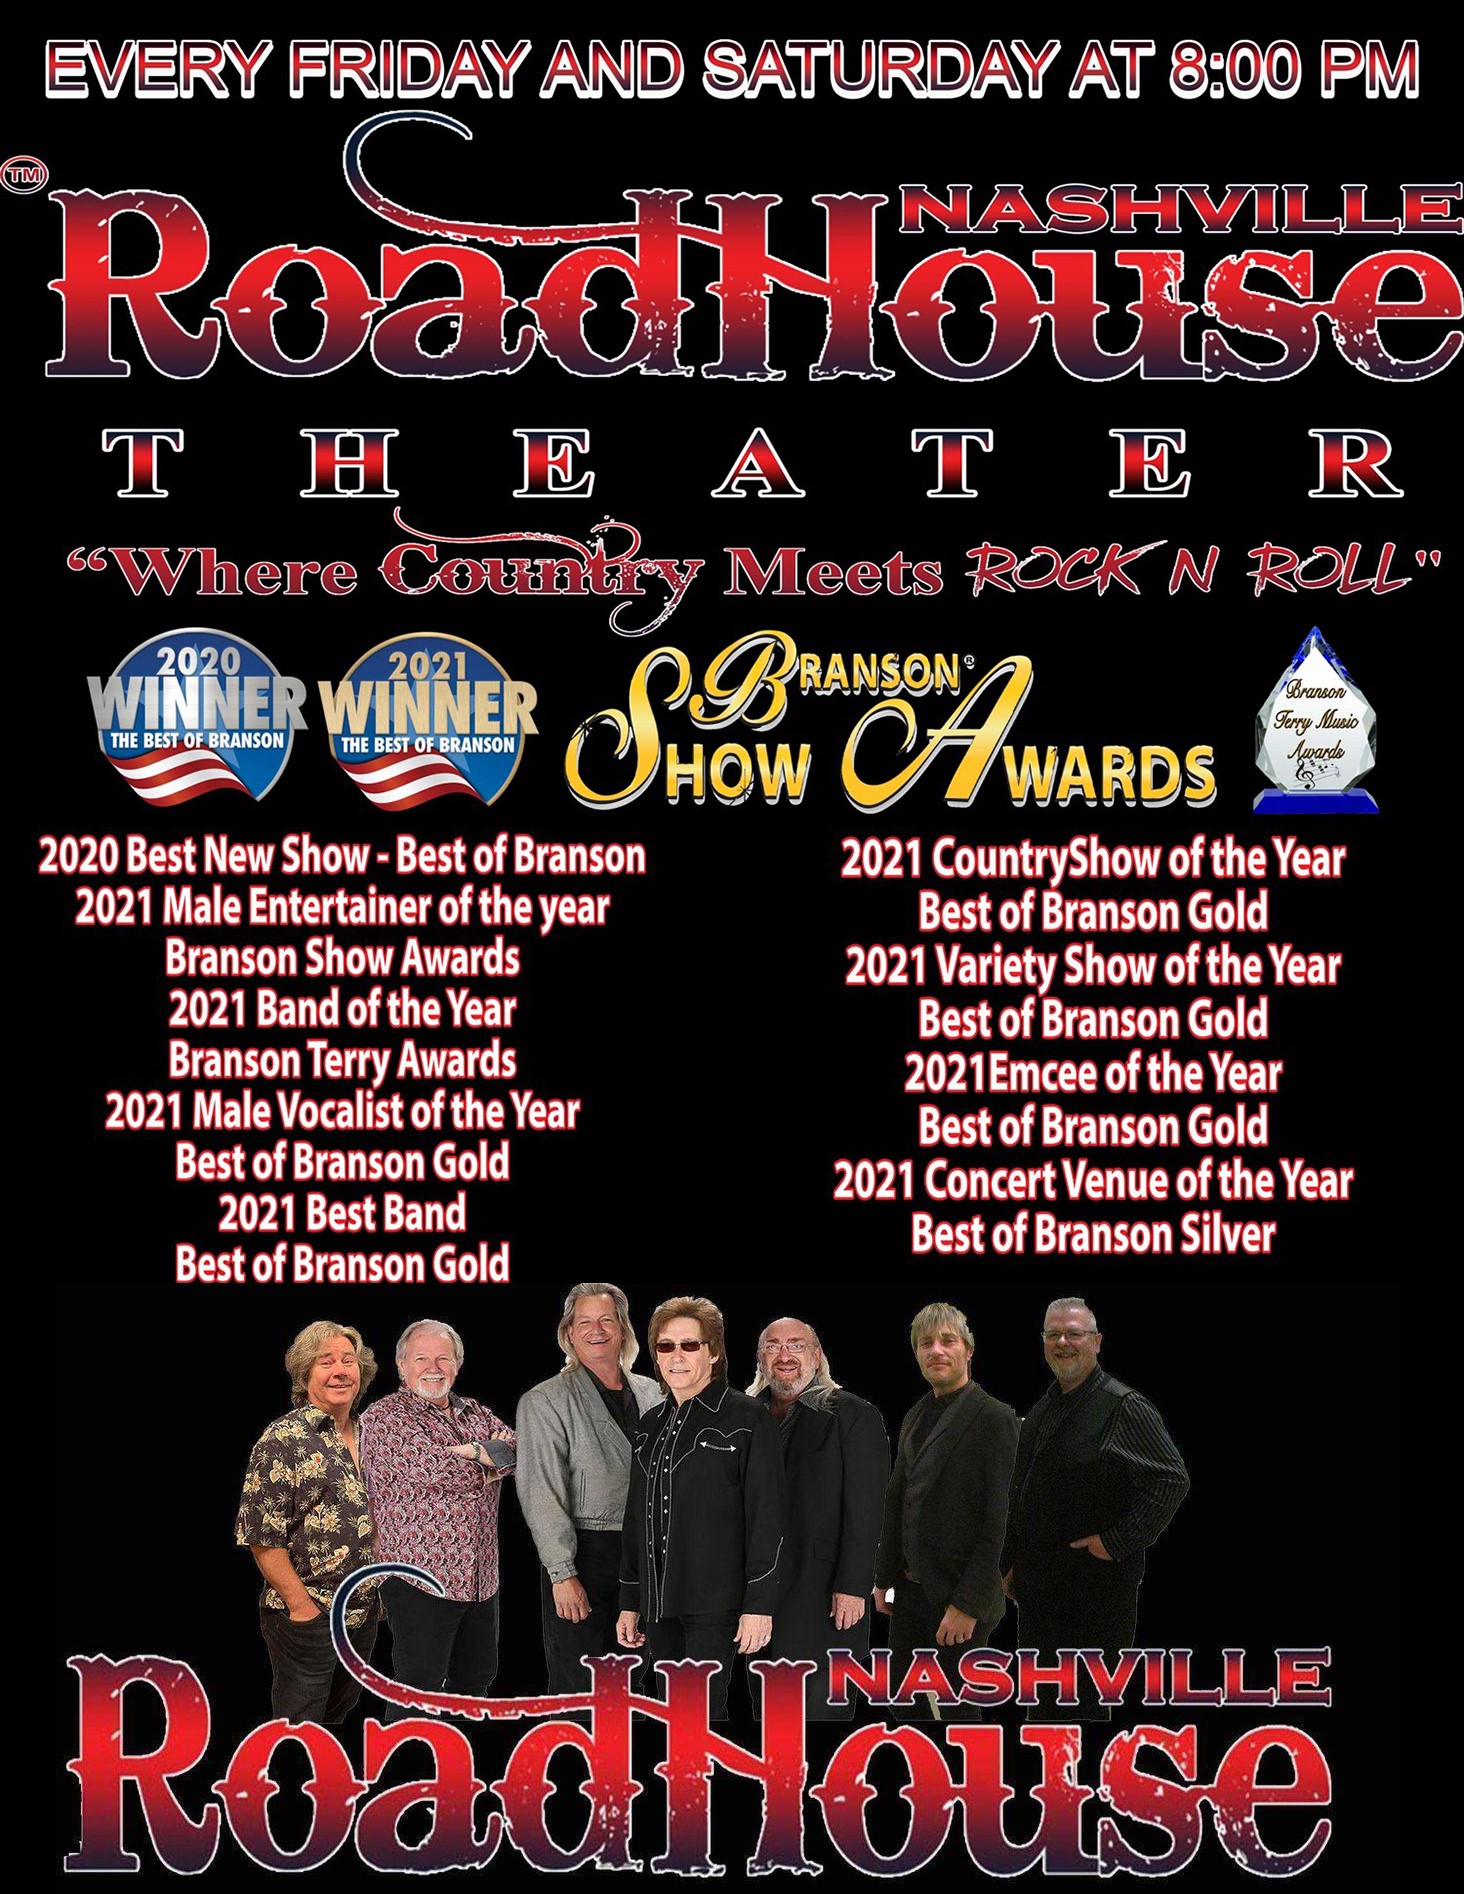 Nashville Roadhouse Live Where Country Meets Rock N Roll on ene. 02, 00:00@Nashville Roadhouse Theater at The Branson Star - Pick a seat, Buy tickets and Get information on nashvilleroadhouse.com bransonstartheater